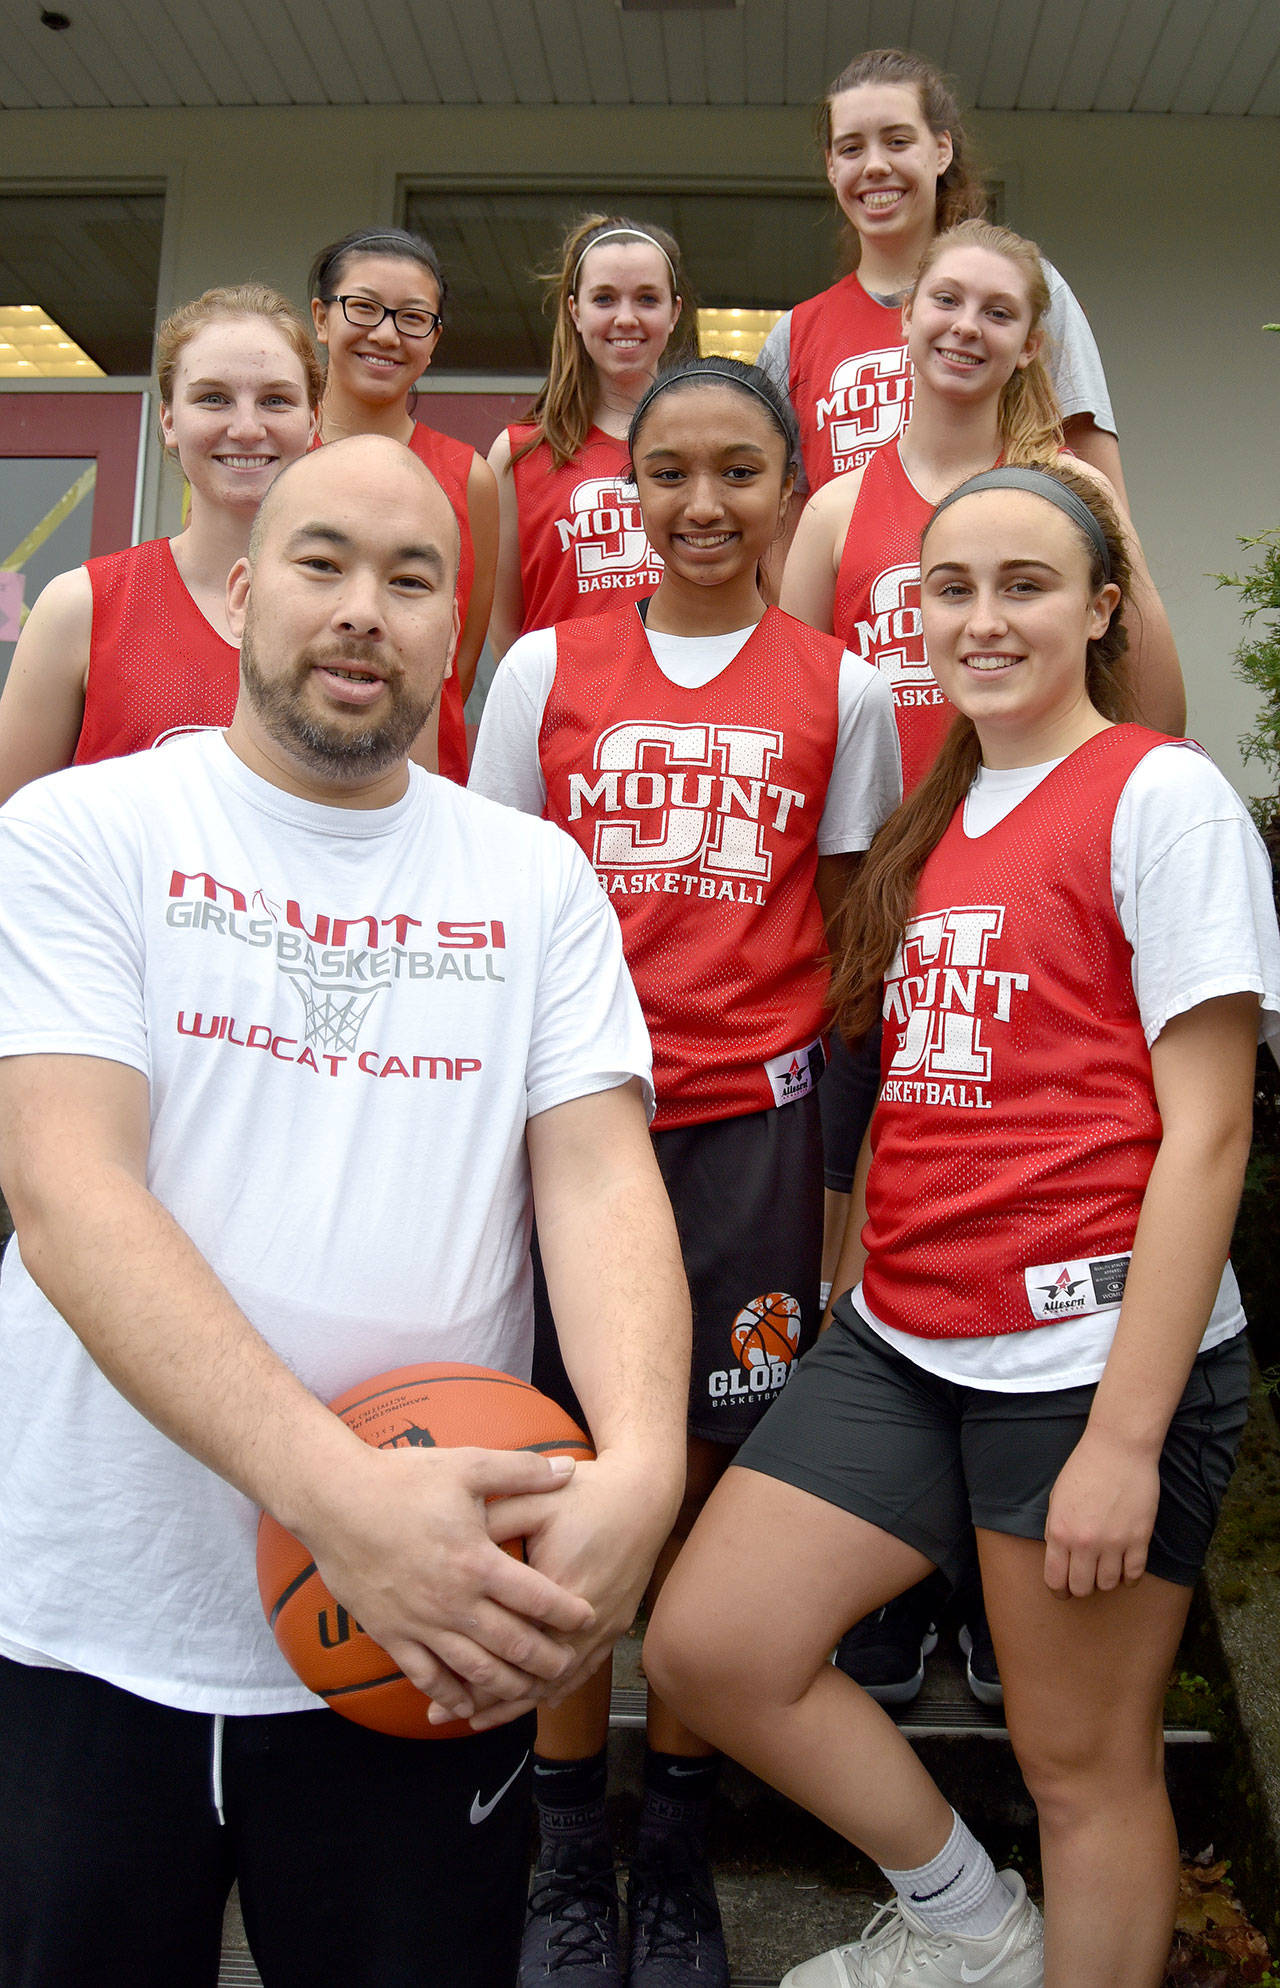 Members of the Mount Si High School varsity girls basketball team finished practice Saturday with a photo with their new coach. Pictured from left are: front - Head Coach Jason Marr and Izzy Smith; middle - Lauren Wilbourne, Nitika Kumar, and Joelle Buck; back - Aliea Bliven, Jenae Usselman and Selah Heide. Sam Smith is missing. (Carol Ladwig/Staff Photo)